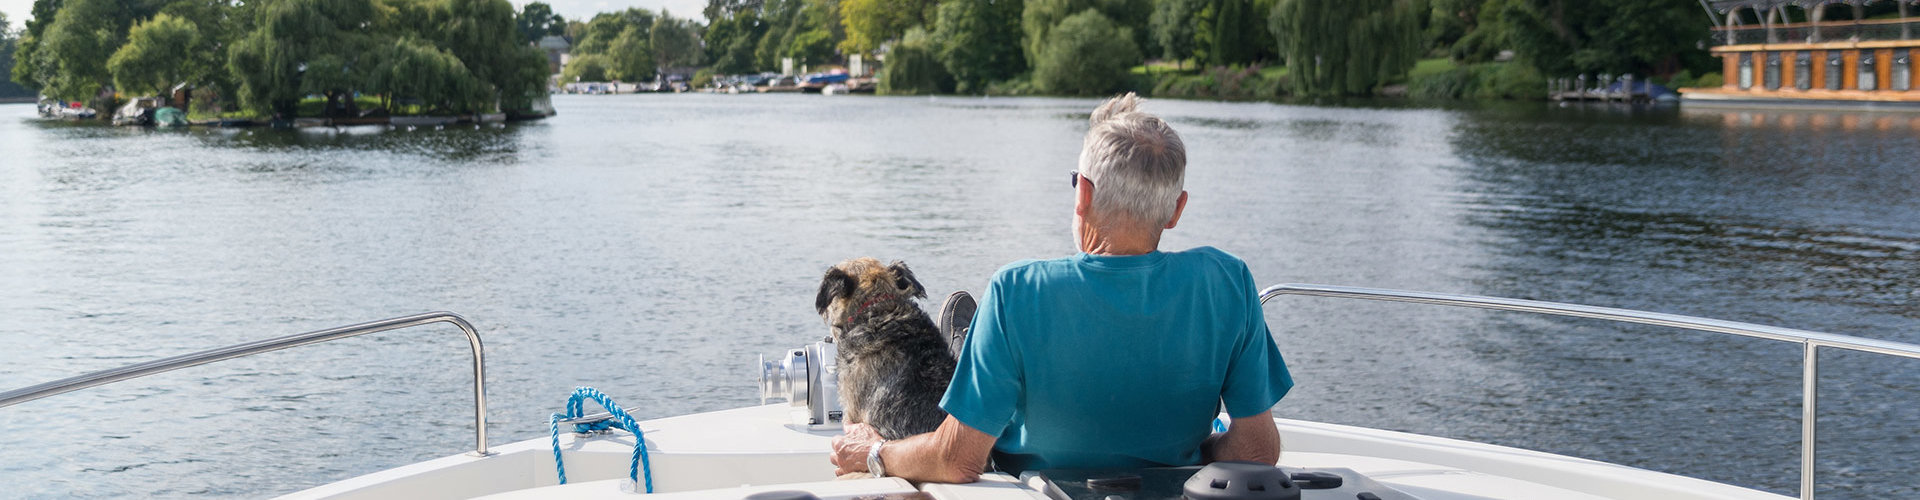 Boating holidays with dogs